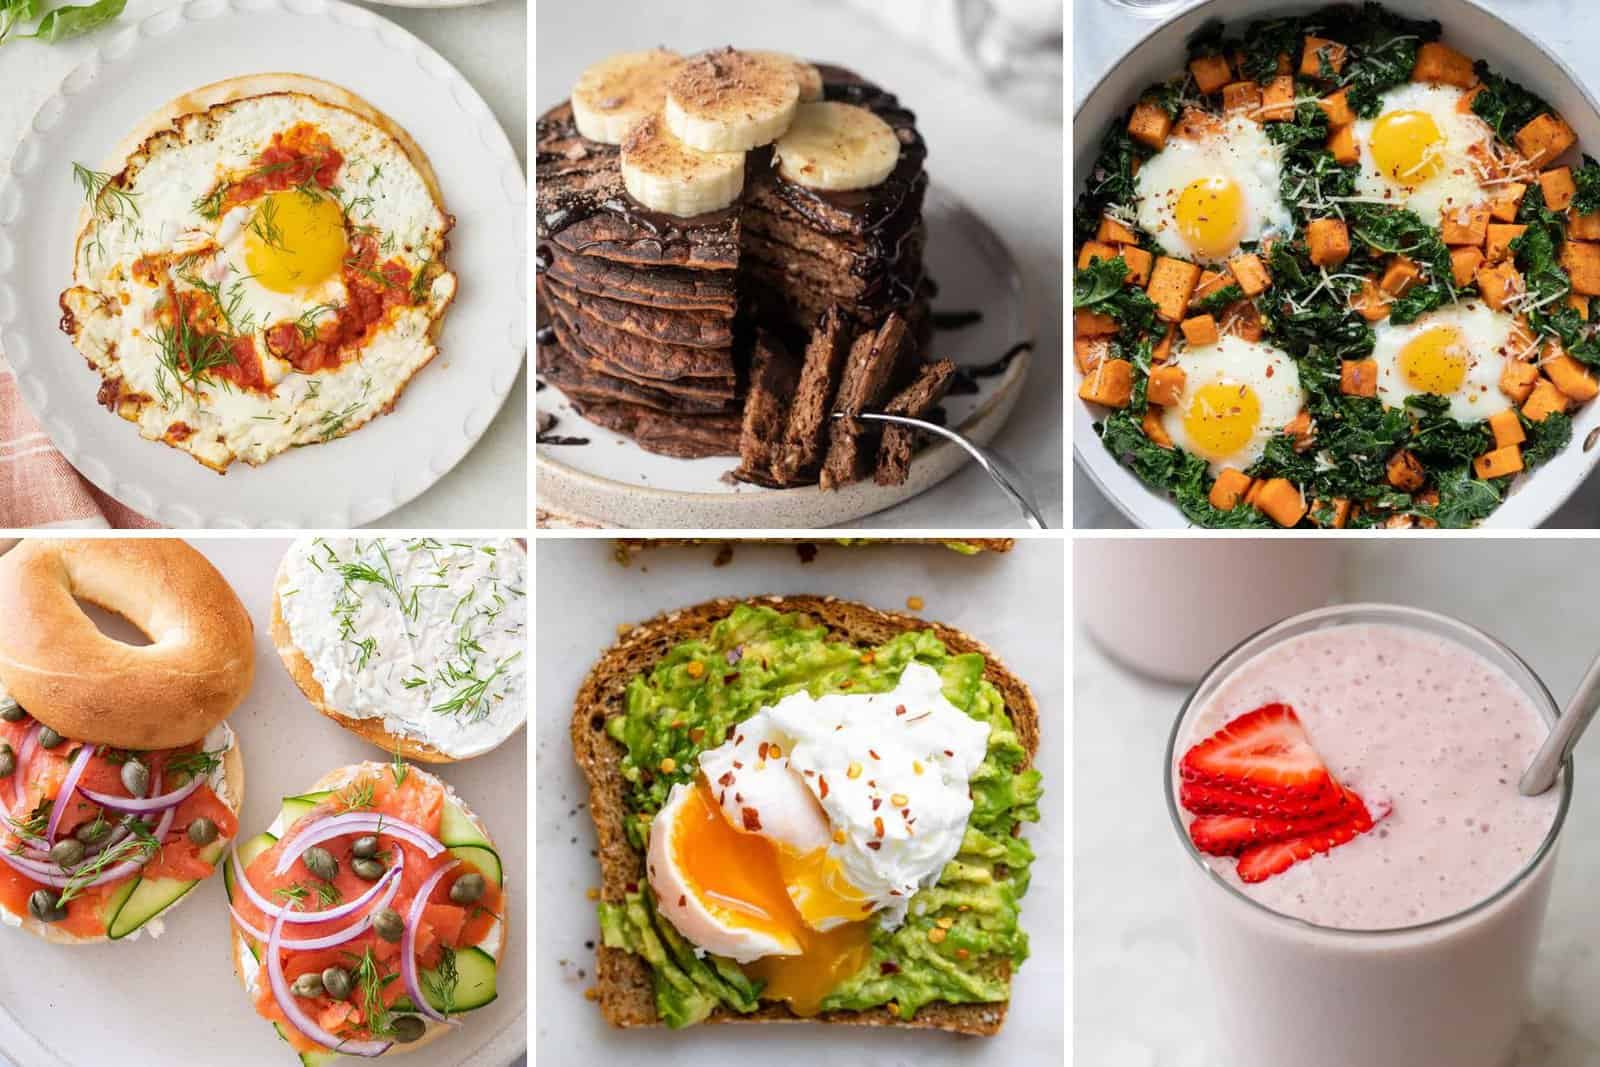 6 image collage of breakfast recipes with 5 ingredients or less.